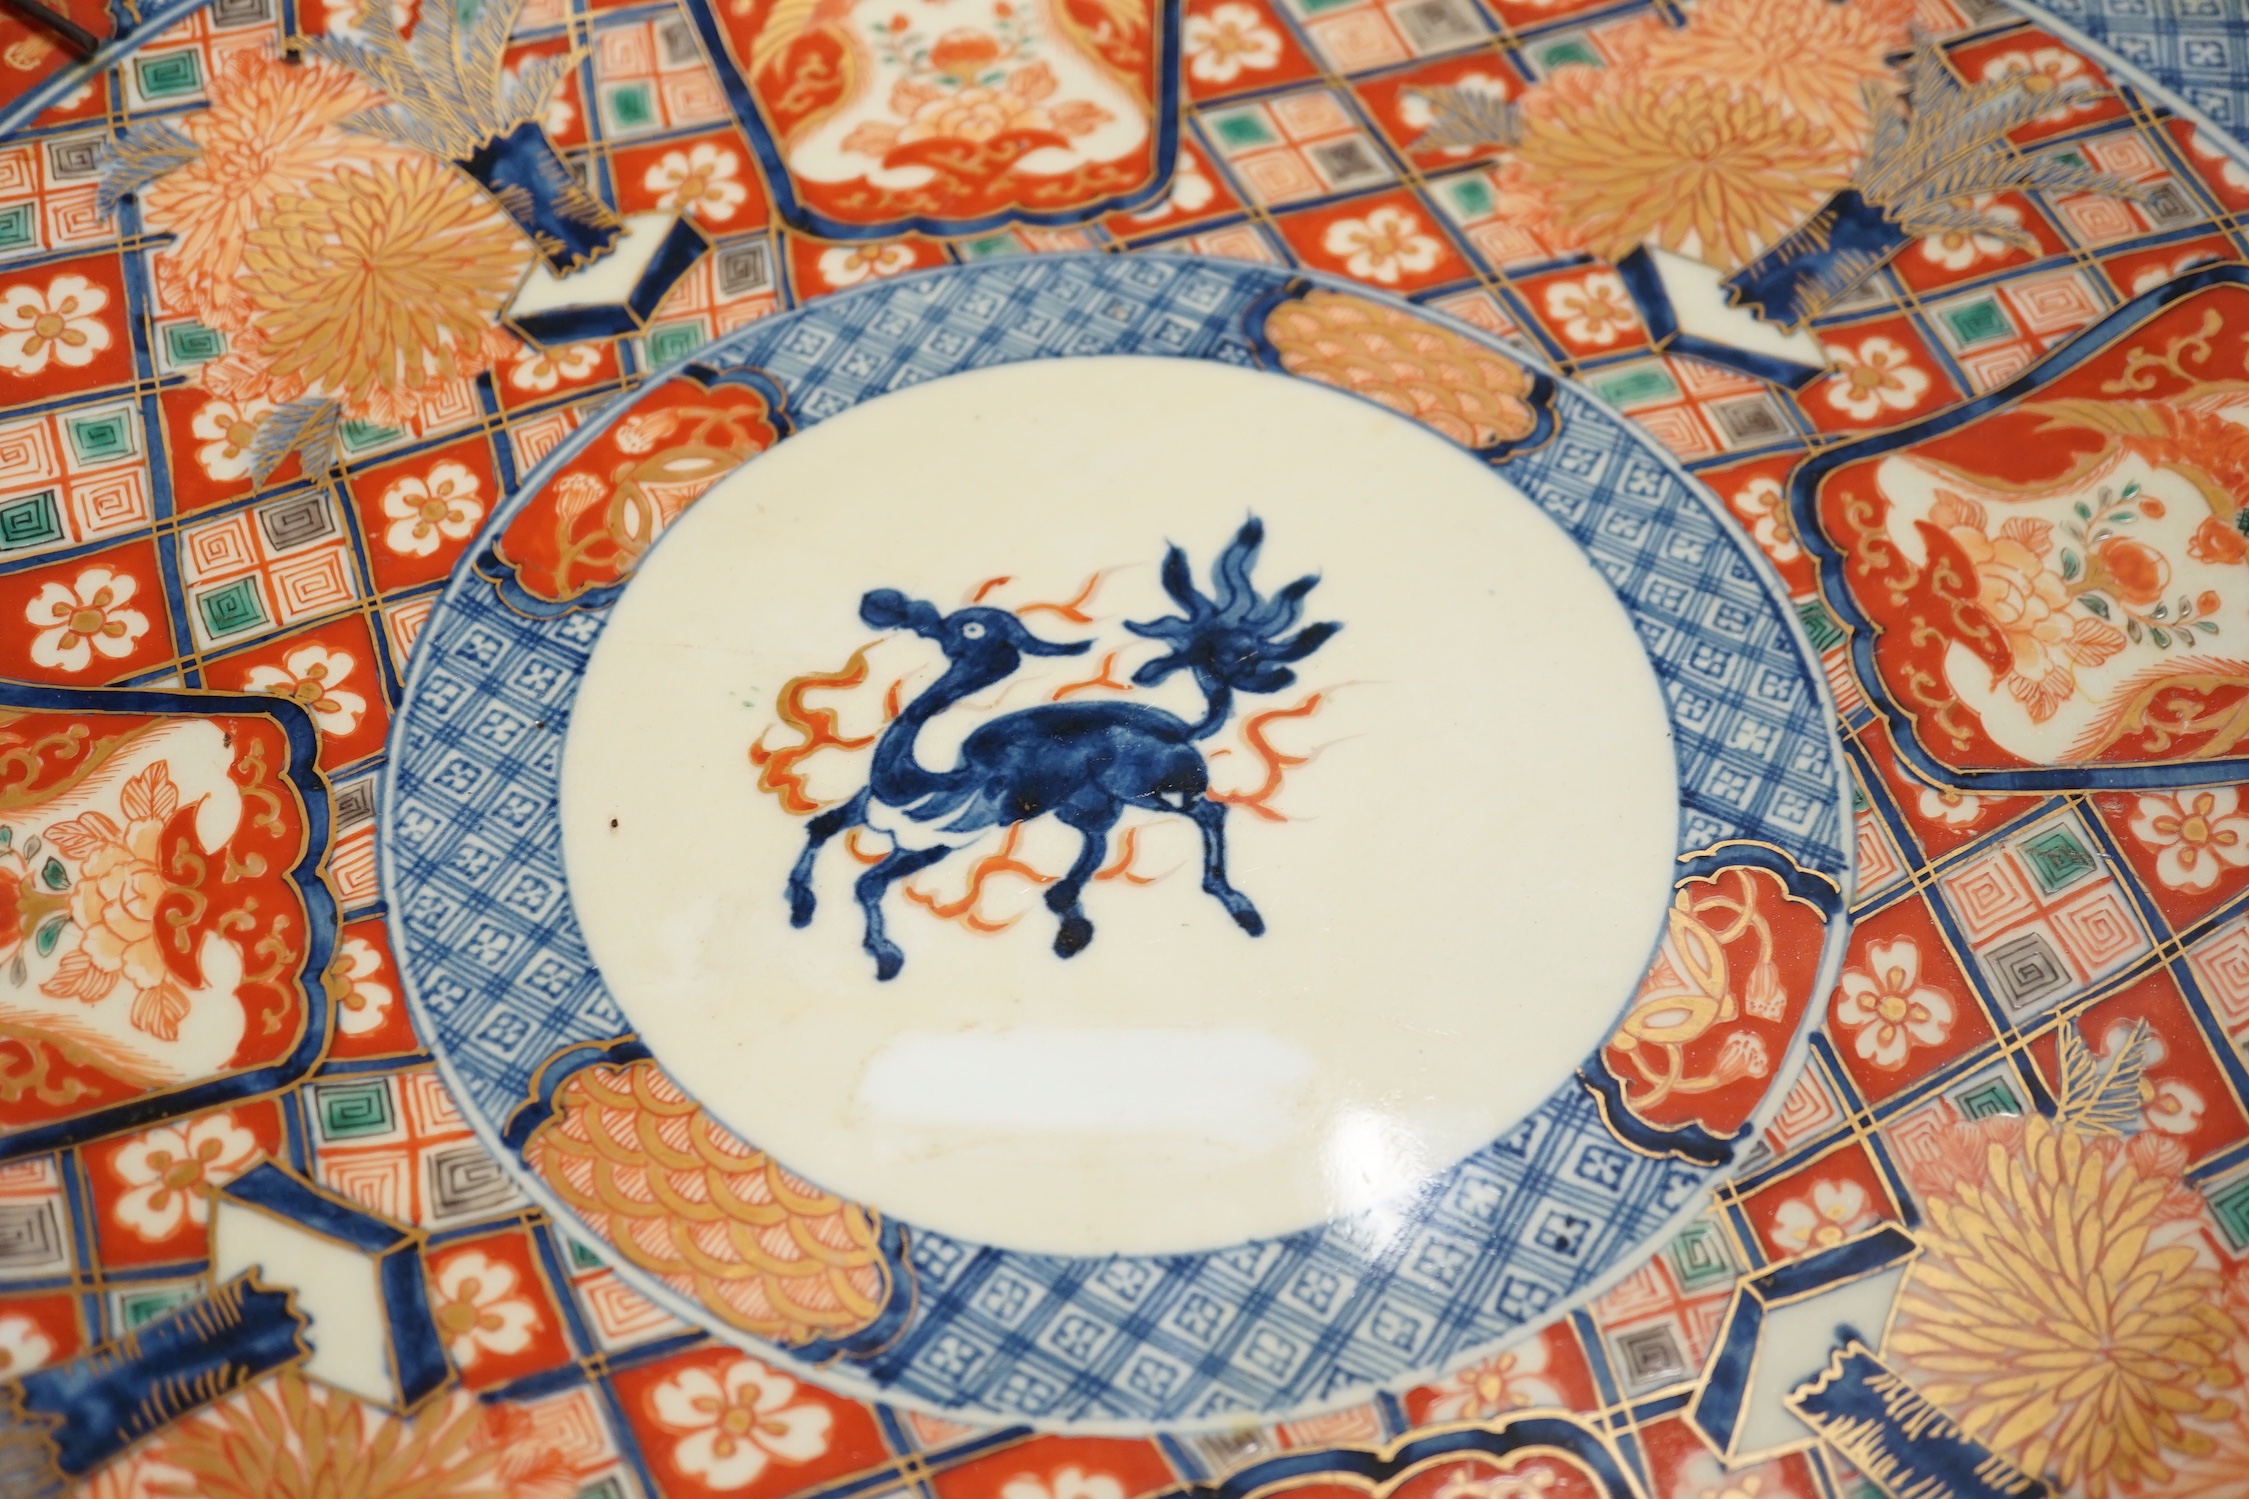 A Japanese Imari charger, Meiji period - 47.5cm wide